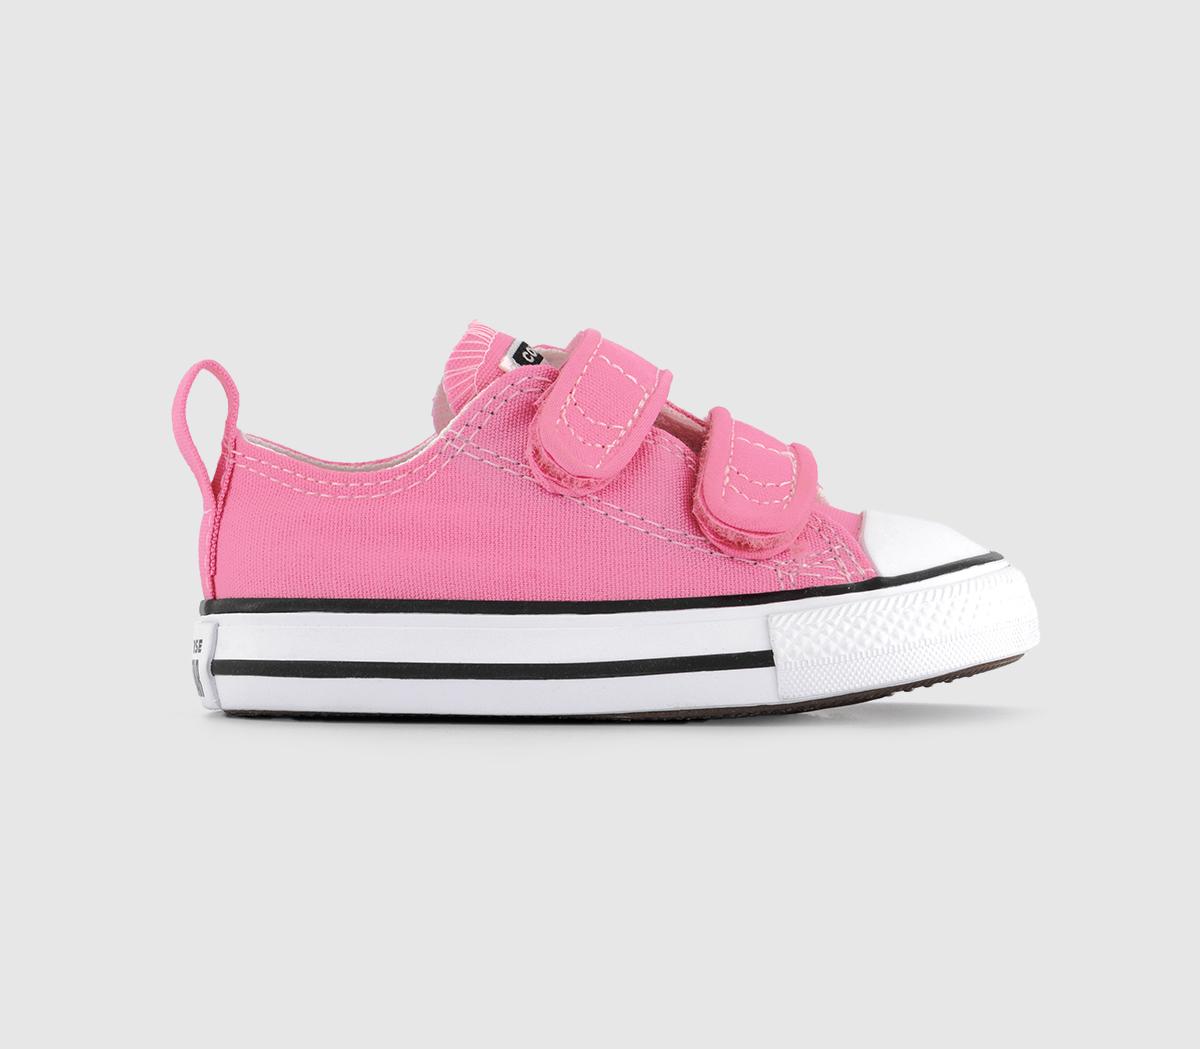 ConverseAll Star 2VLace TrainersPink